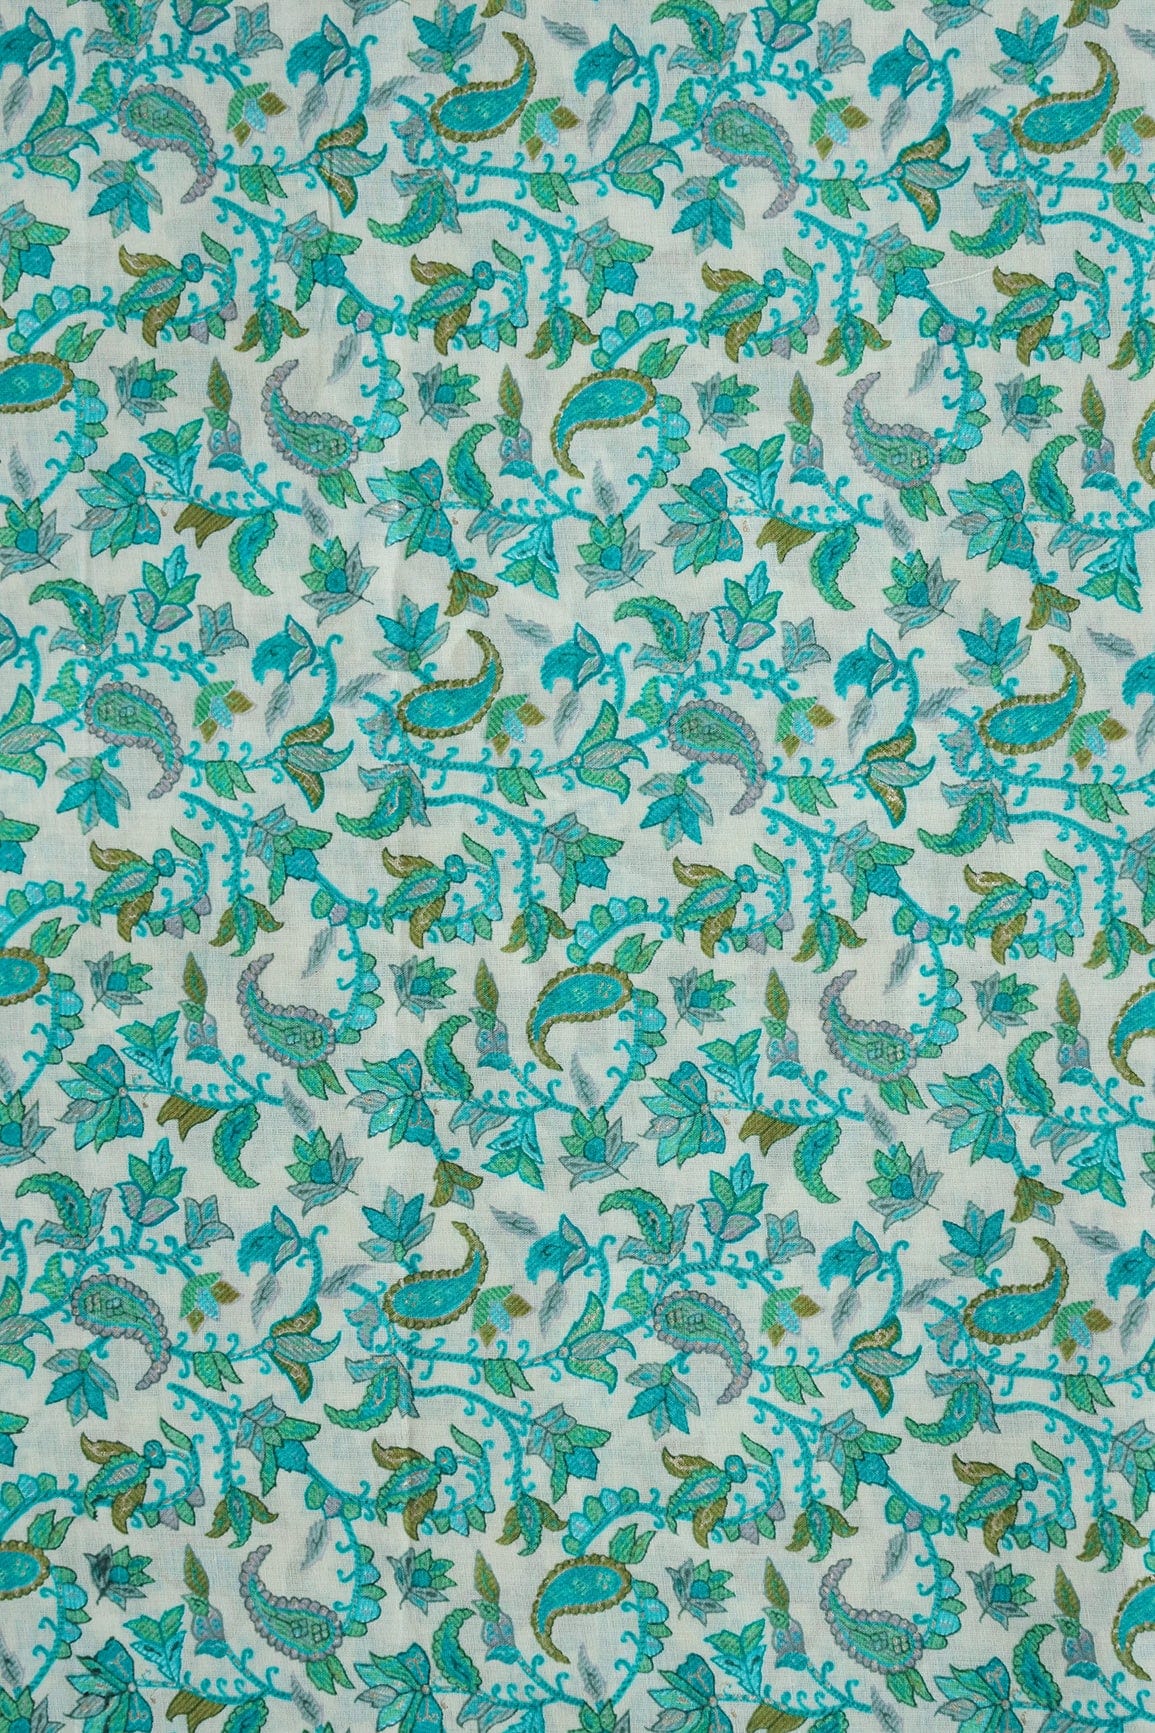 doeraa Prints Turquoise And White Paisley Foil Print On Pure Mul Cotton Fabric